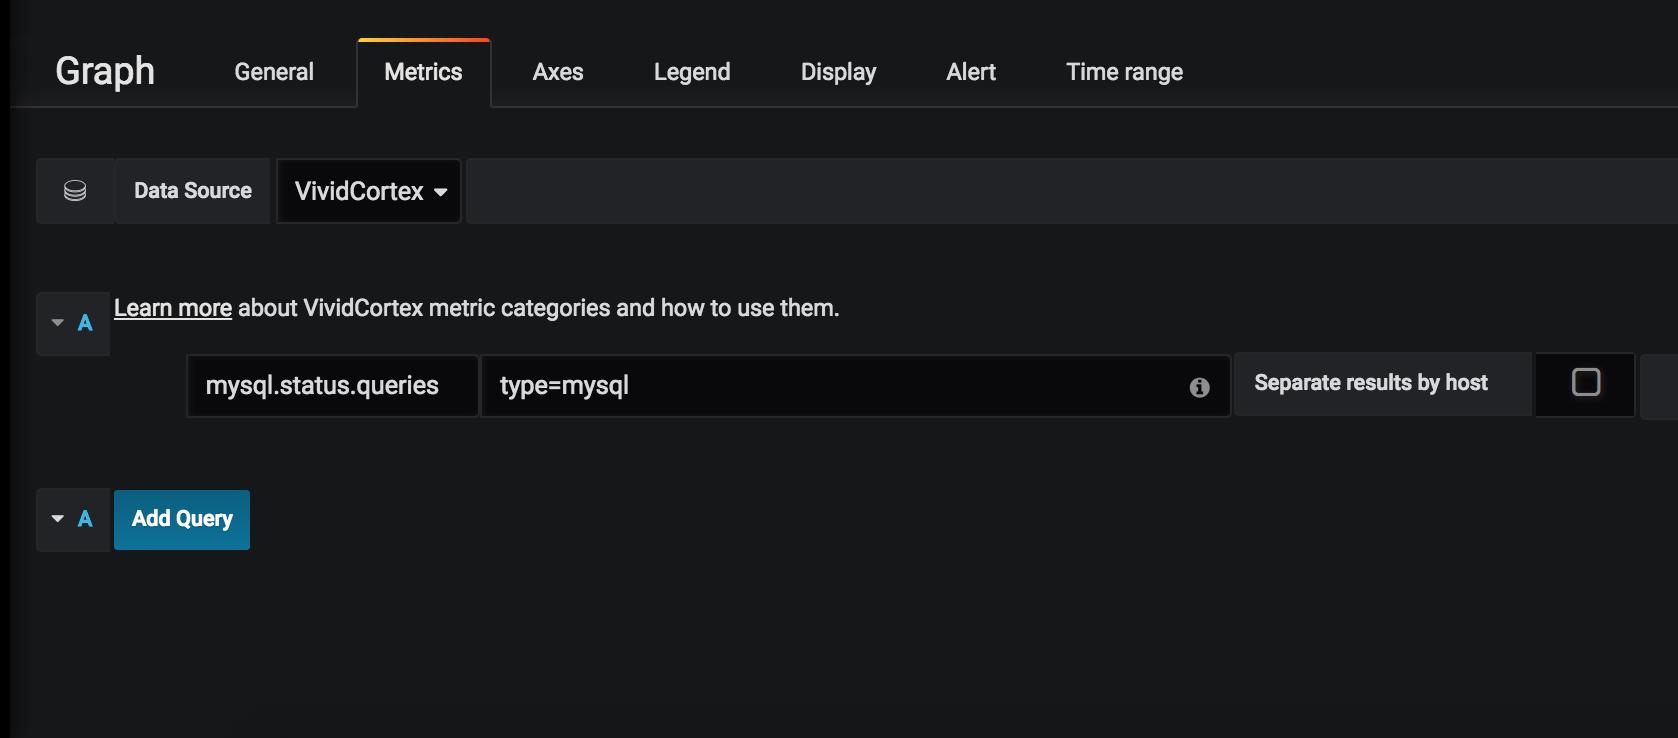 With Grafana’s ad-hoc filters you can create new key/value filters on the fly.